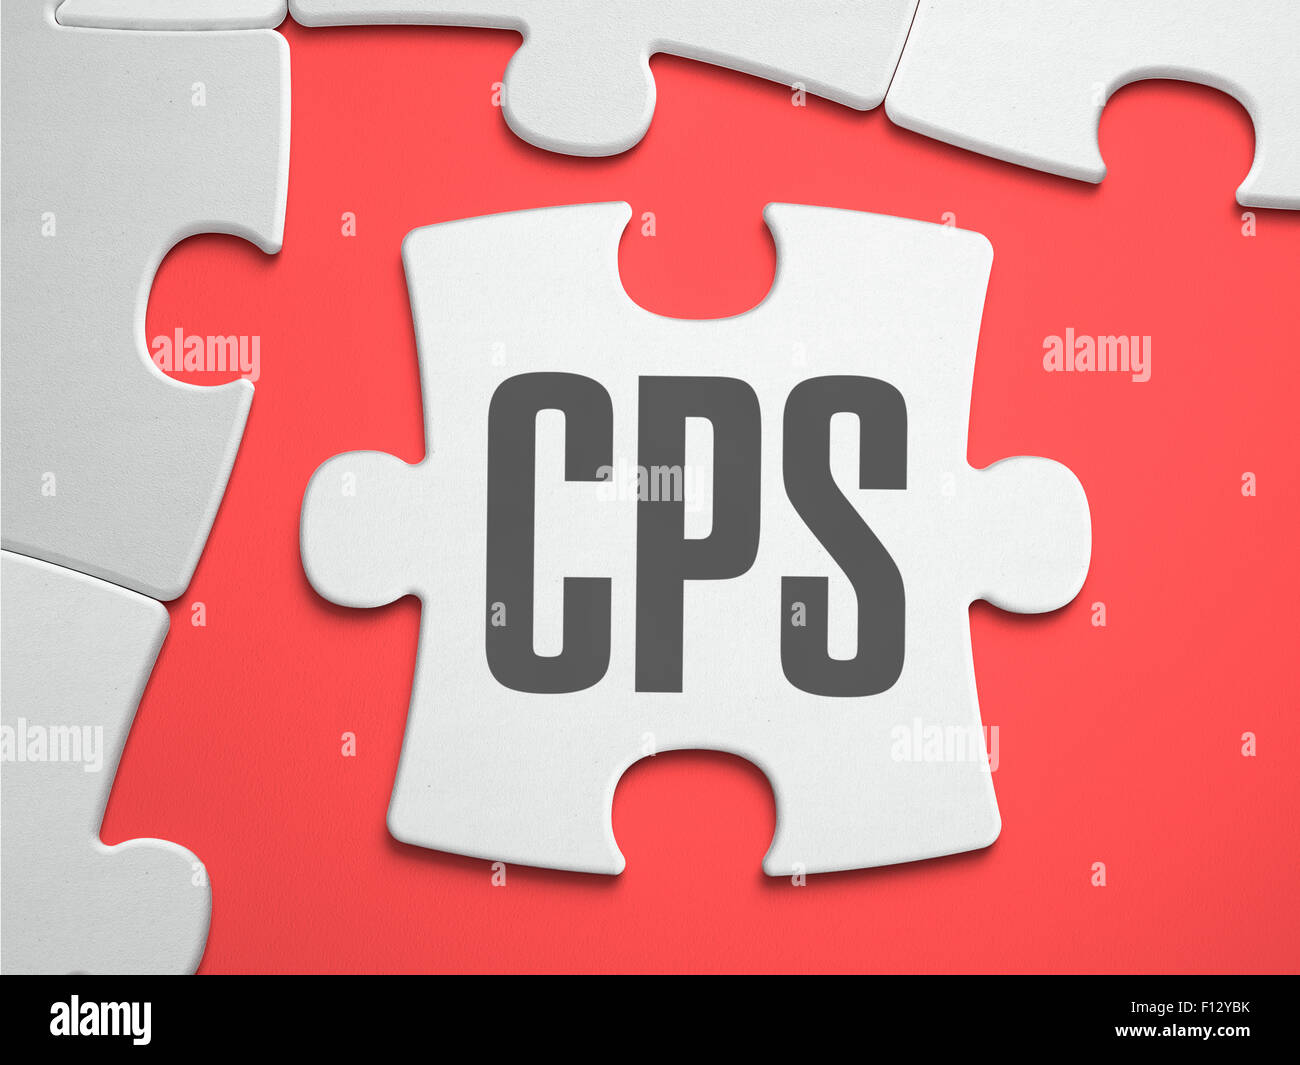 CPS - Puzzle on the Place of Missing Pieces. Stock Photo